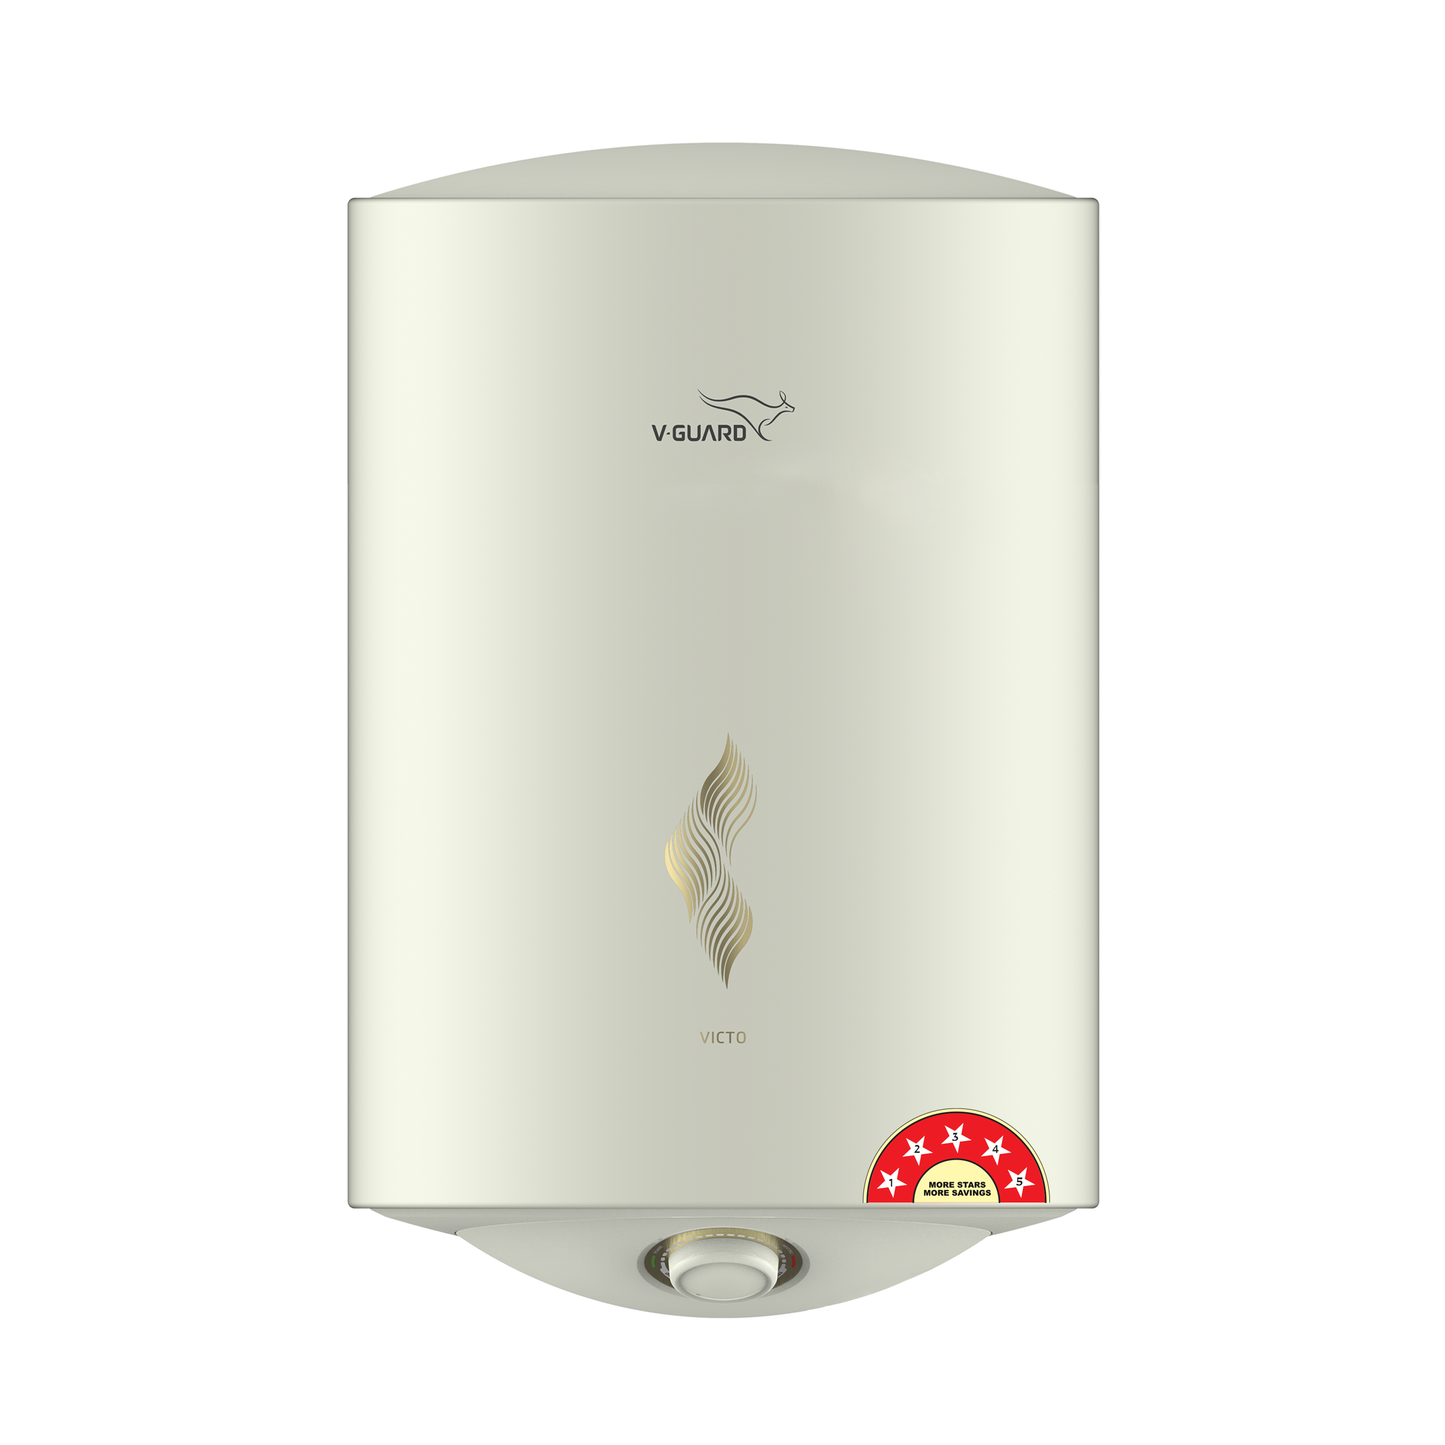 Victo 25 L Water Heater with BEE 5 Star Rating